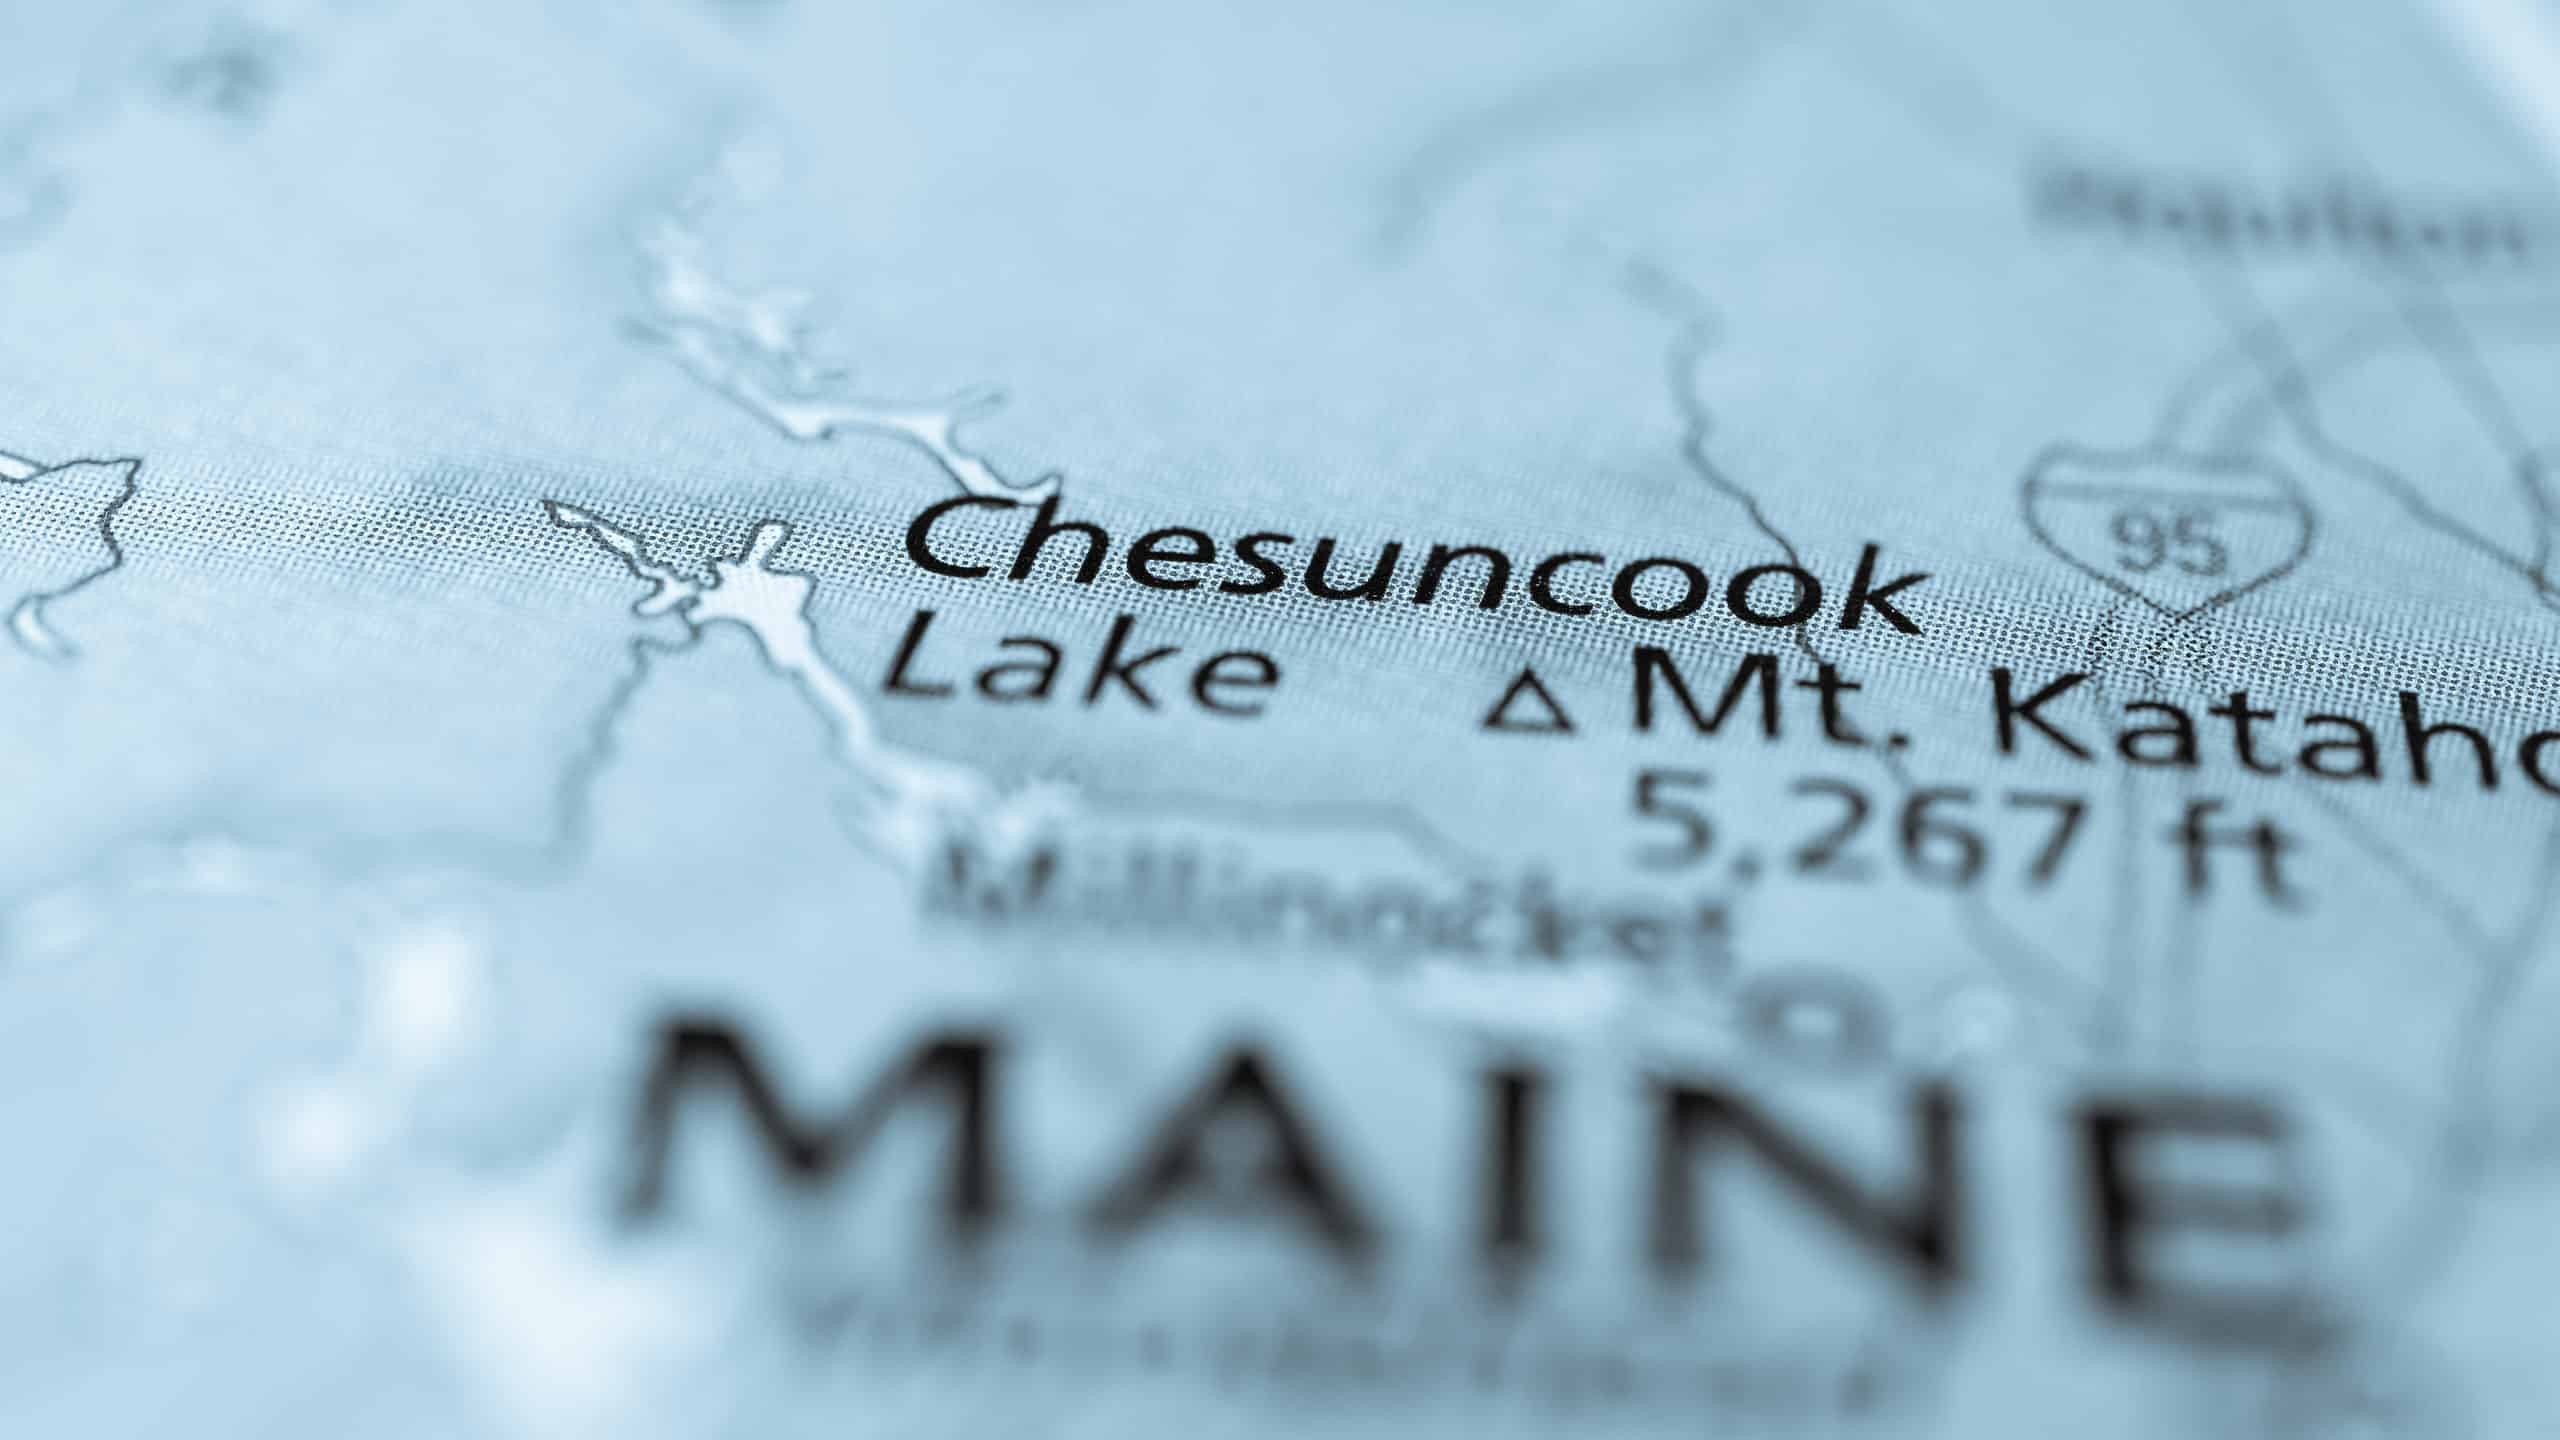 Chesuncook Lake is the largest man-made lake in Maine.